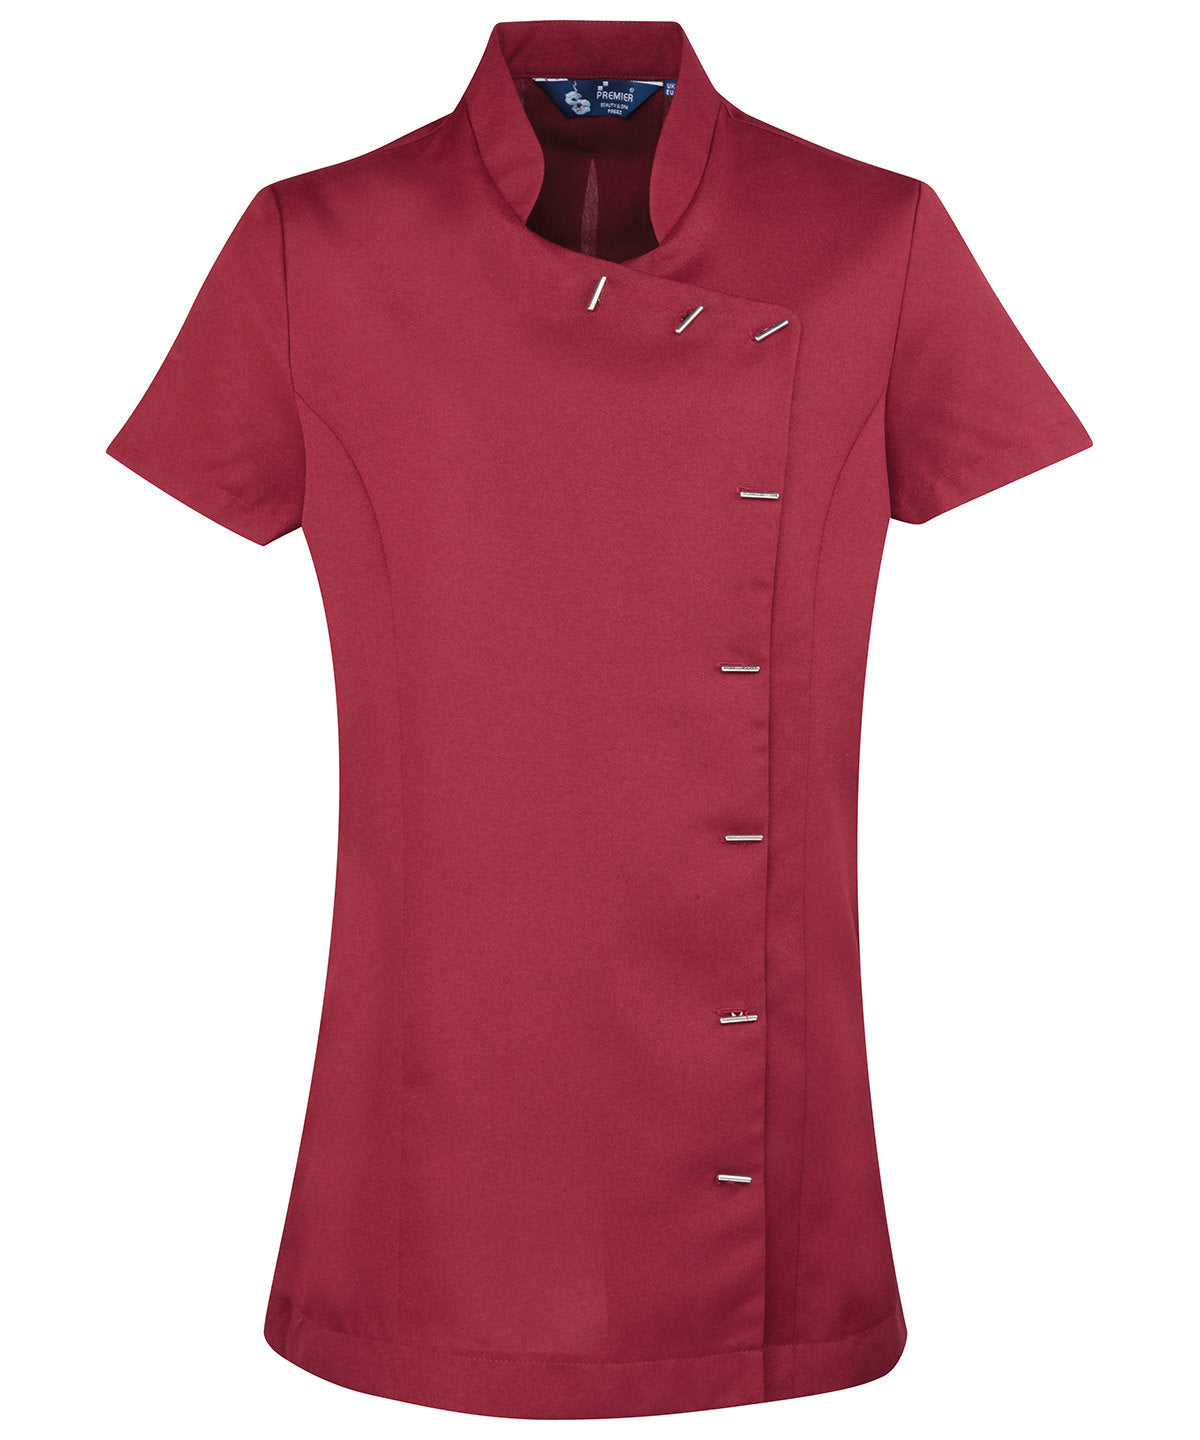 Premier Orchid beauty and spa tunic Burgundy